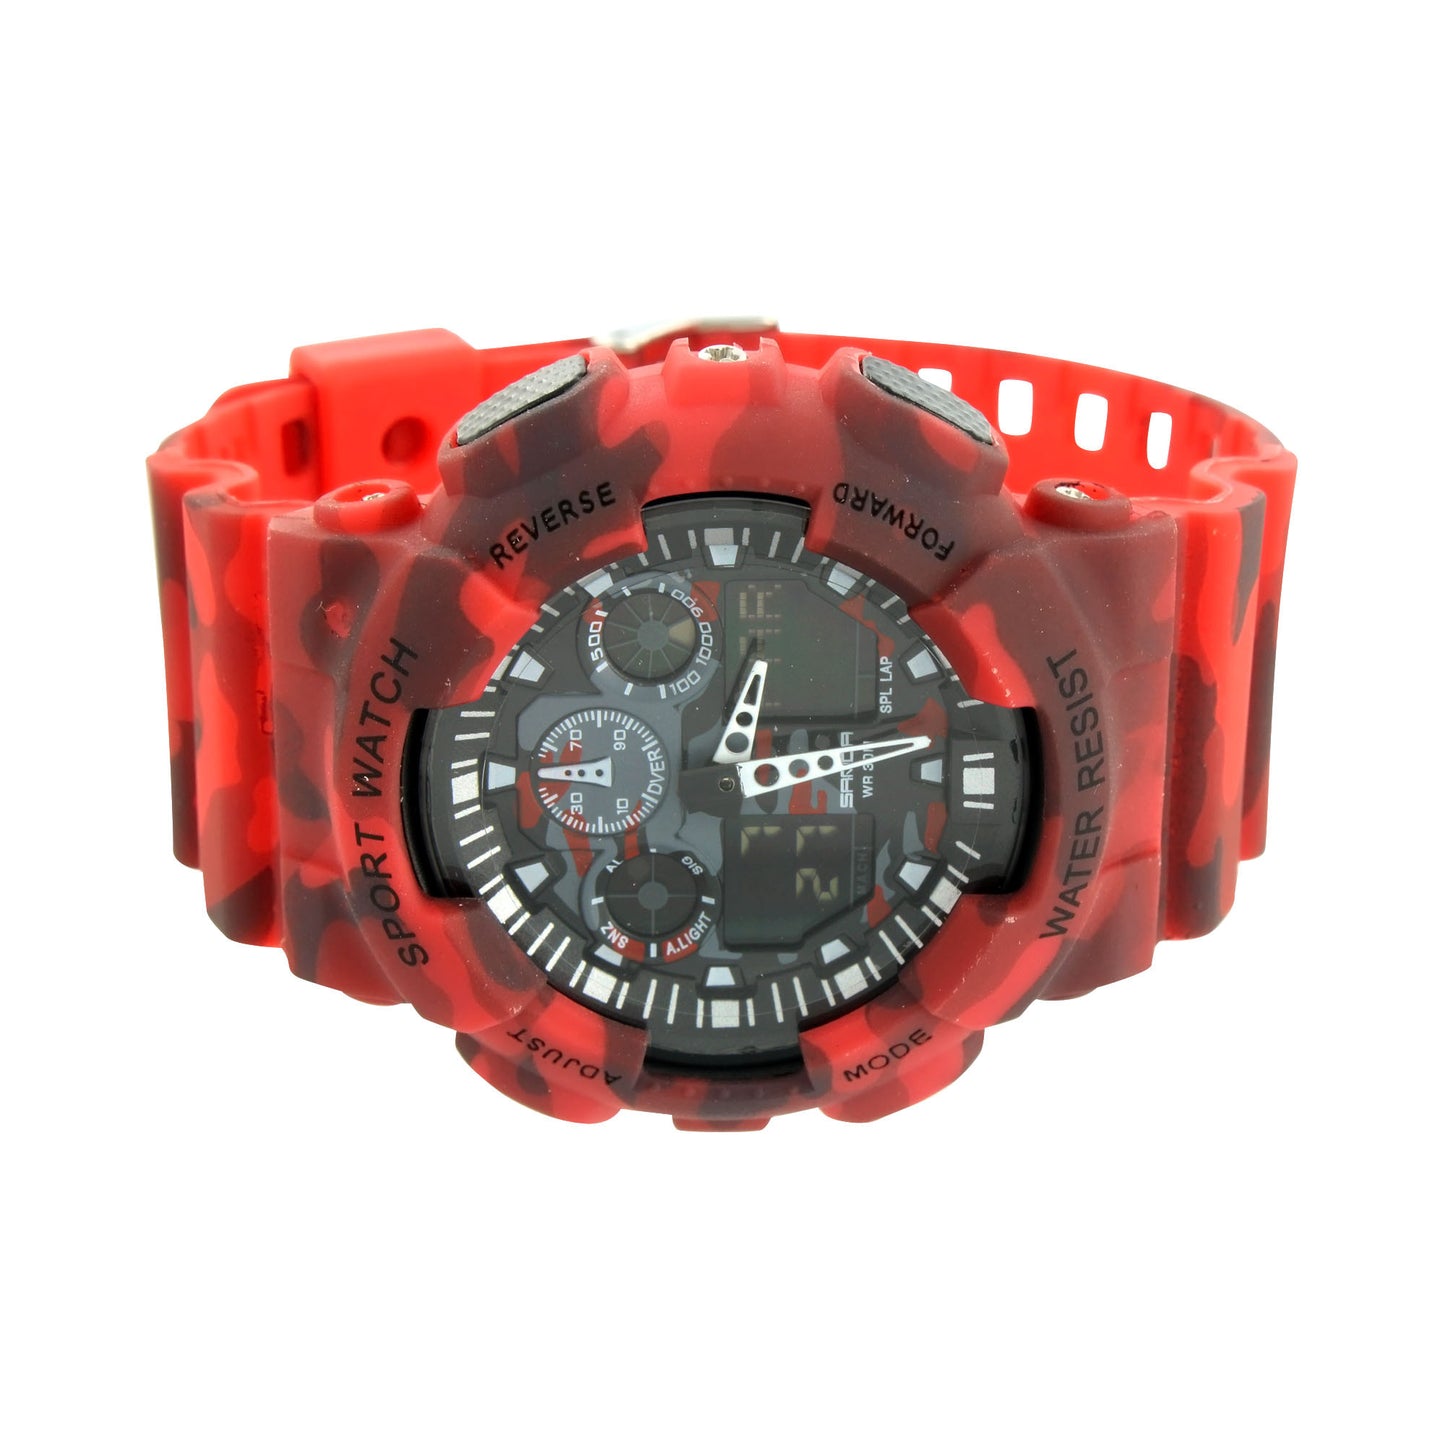 Red Military Army Camouflage Print Digital Watch Resin Band